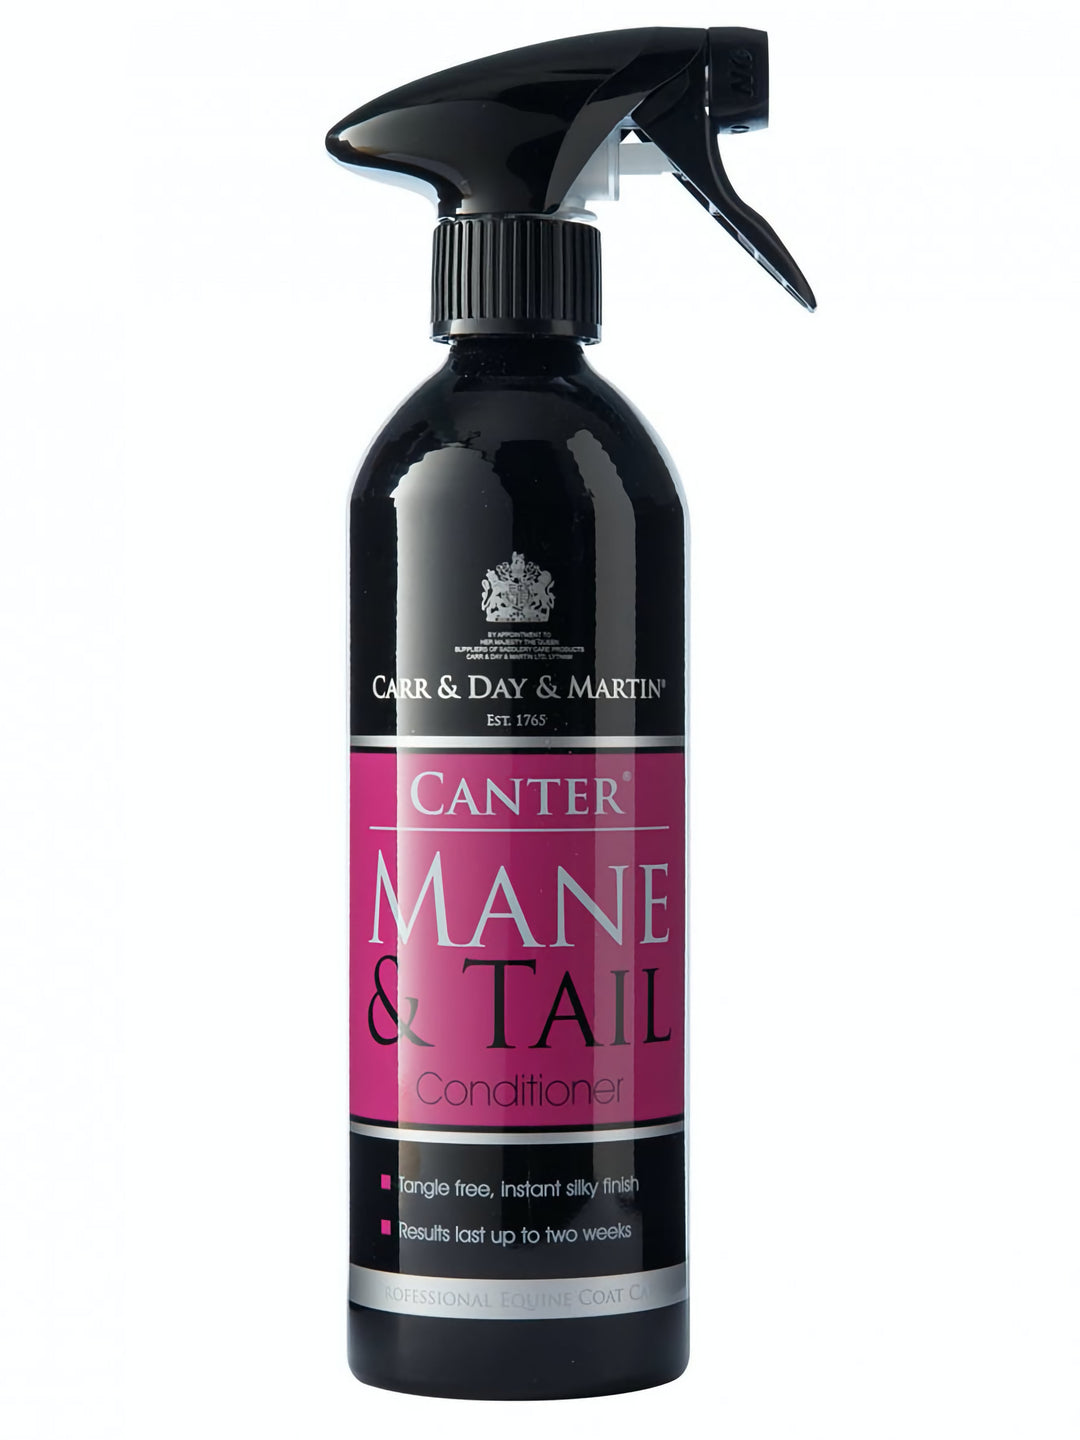 Carr & Day & Martin - Mane & Tail Conditioner